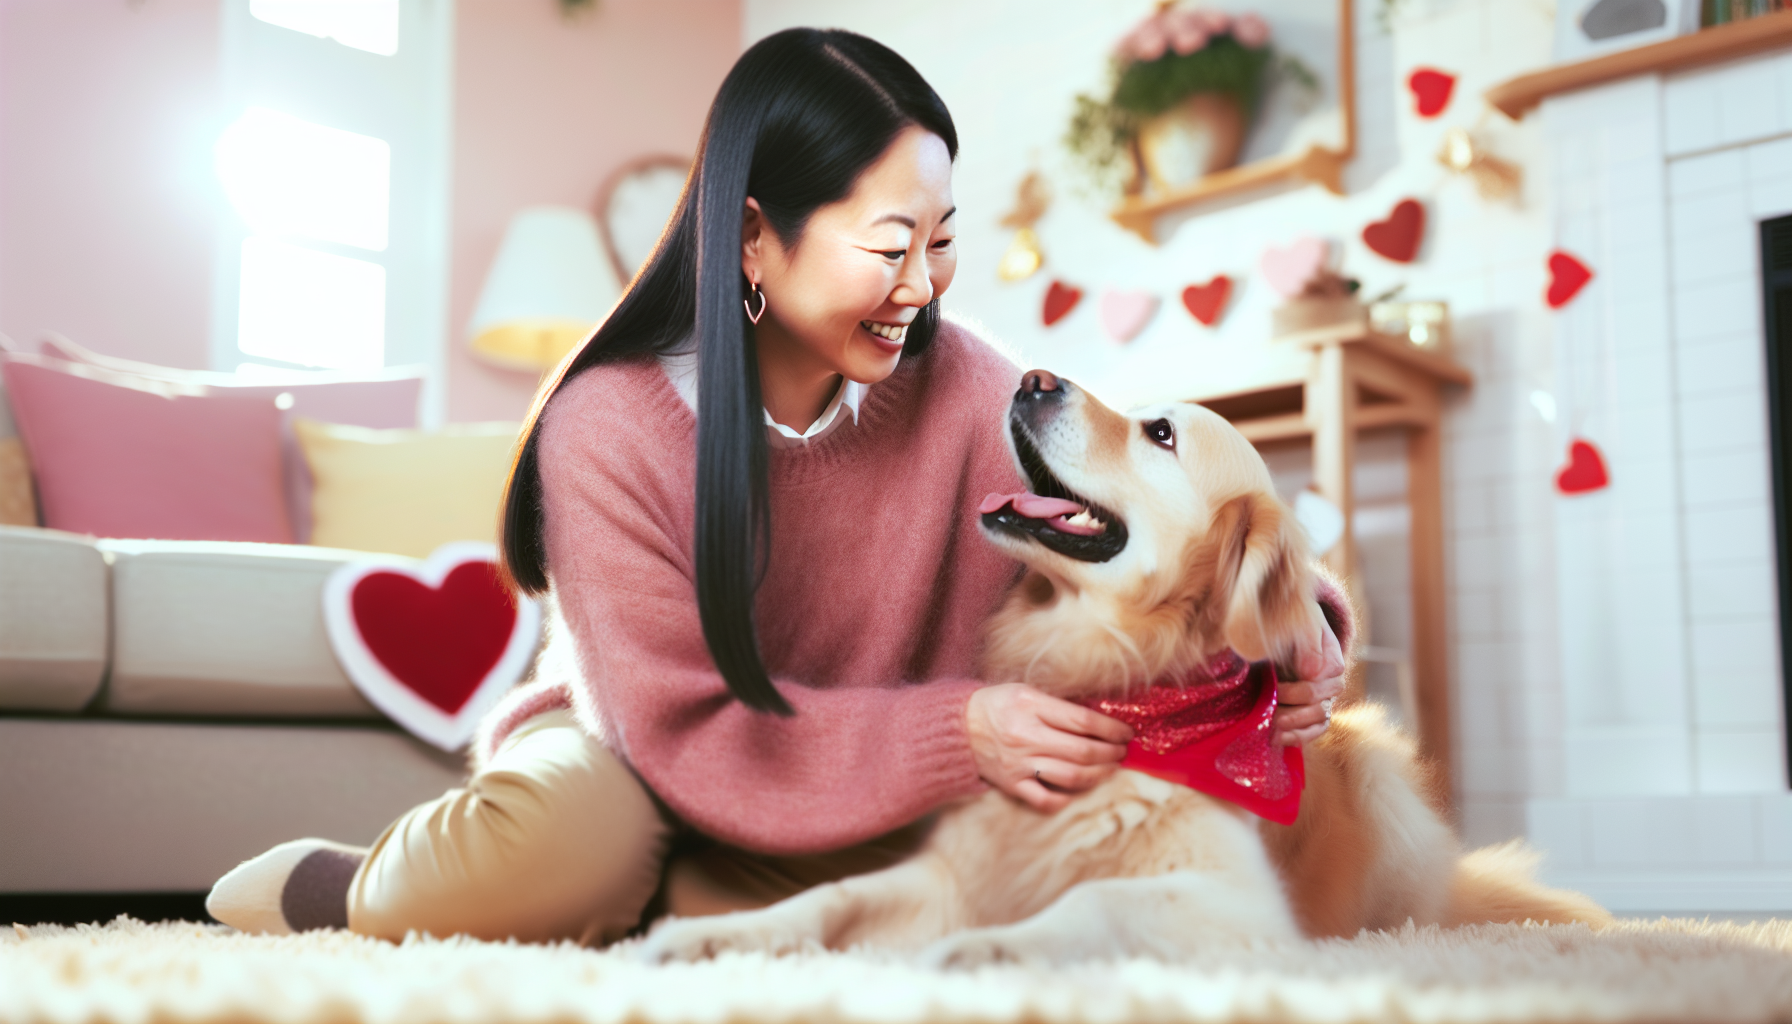 A heartwarming moment between a pet and its owner on Valentine's Day